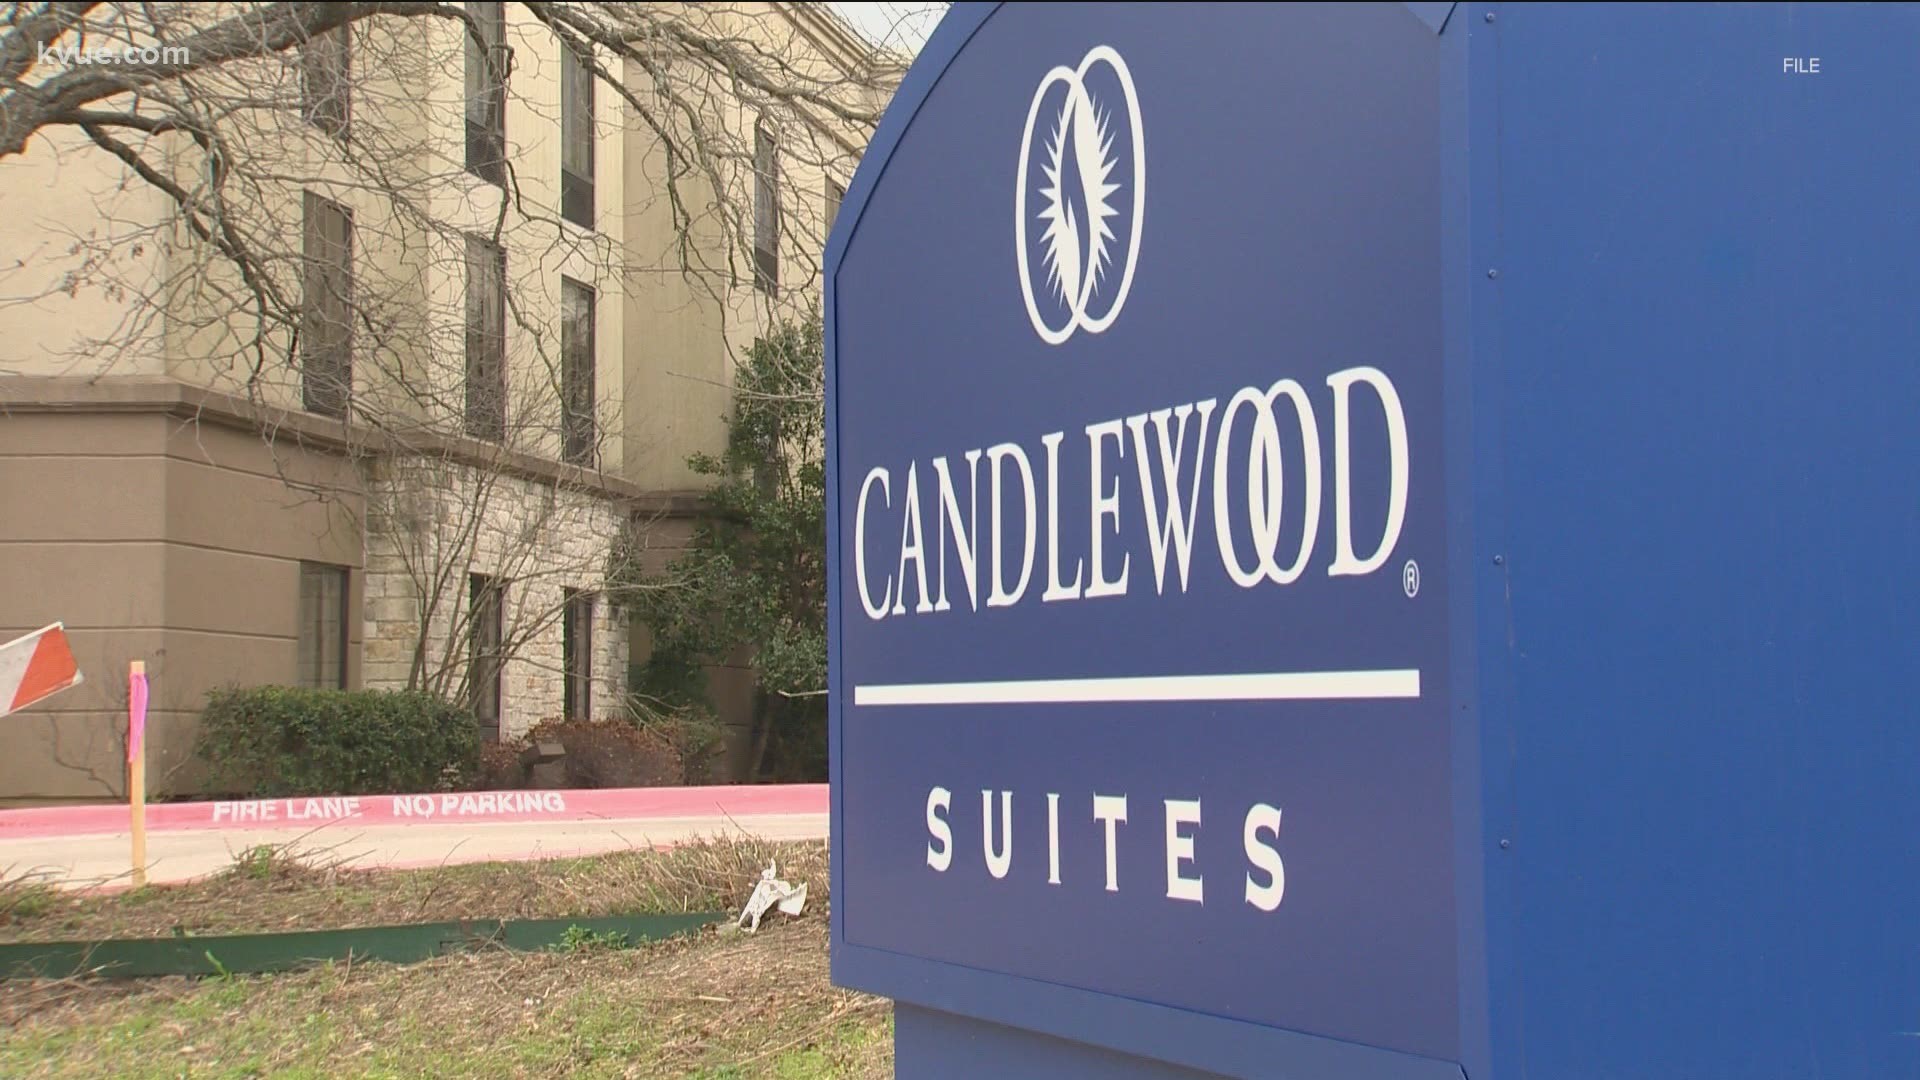 Once again, the proposed purchase of Candlewood Suites is creating some heat between Williamson County and the City of Austin.